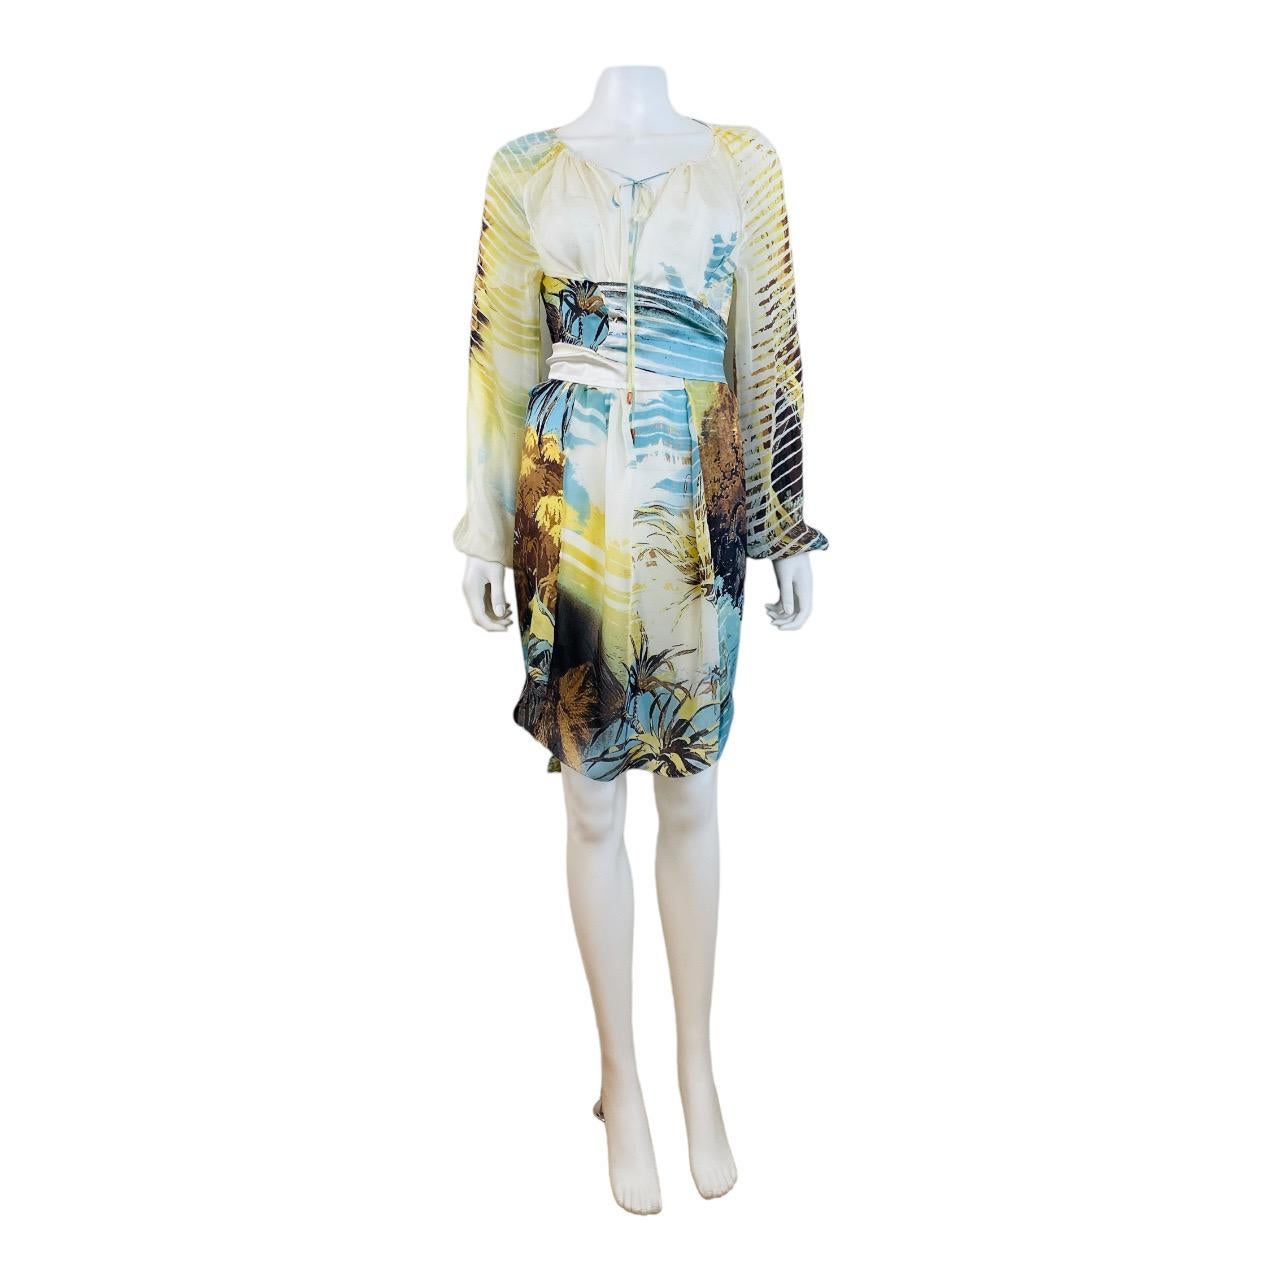 S/S 200s2 2000s Roberto Cavalli Dress 
Oversized lion print on semi sheer chiffon silk fabric
Elastic neckline can be worn many ways but is meant to be tied at the front
Loose flowy fit with wide attached matching silk satin fabric belt can also be